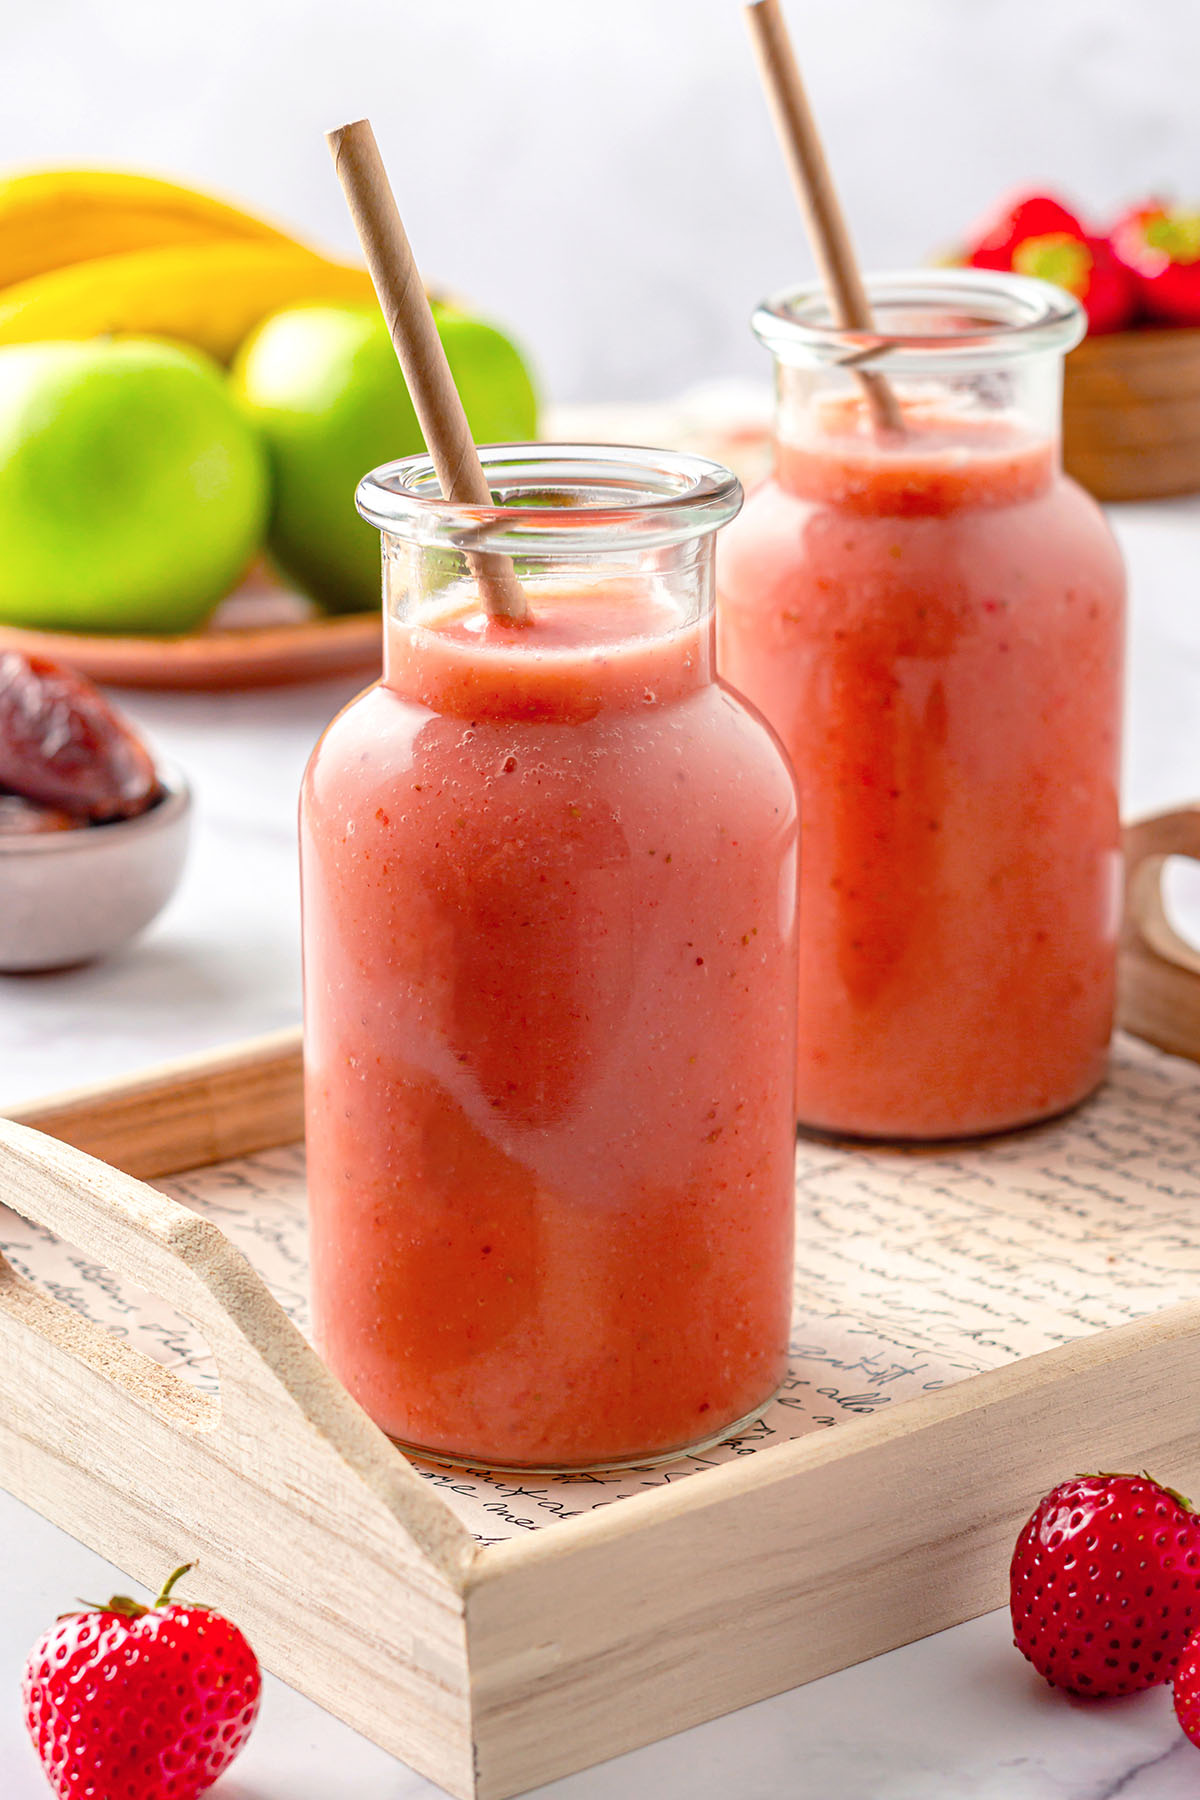 Two strawberry apple smoothie bottles on a wooden tray